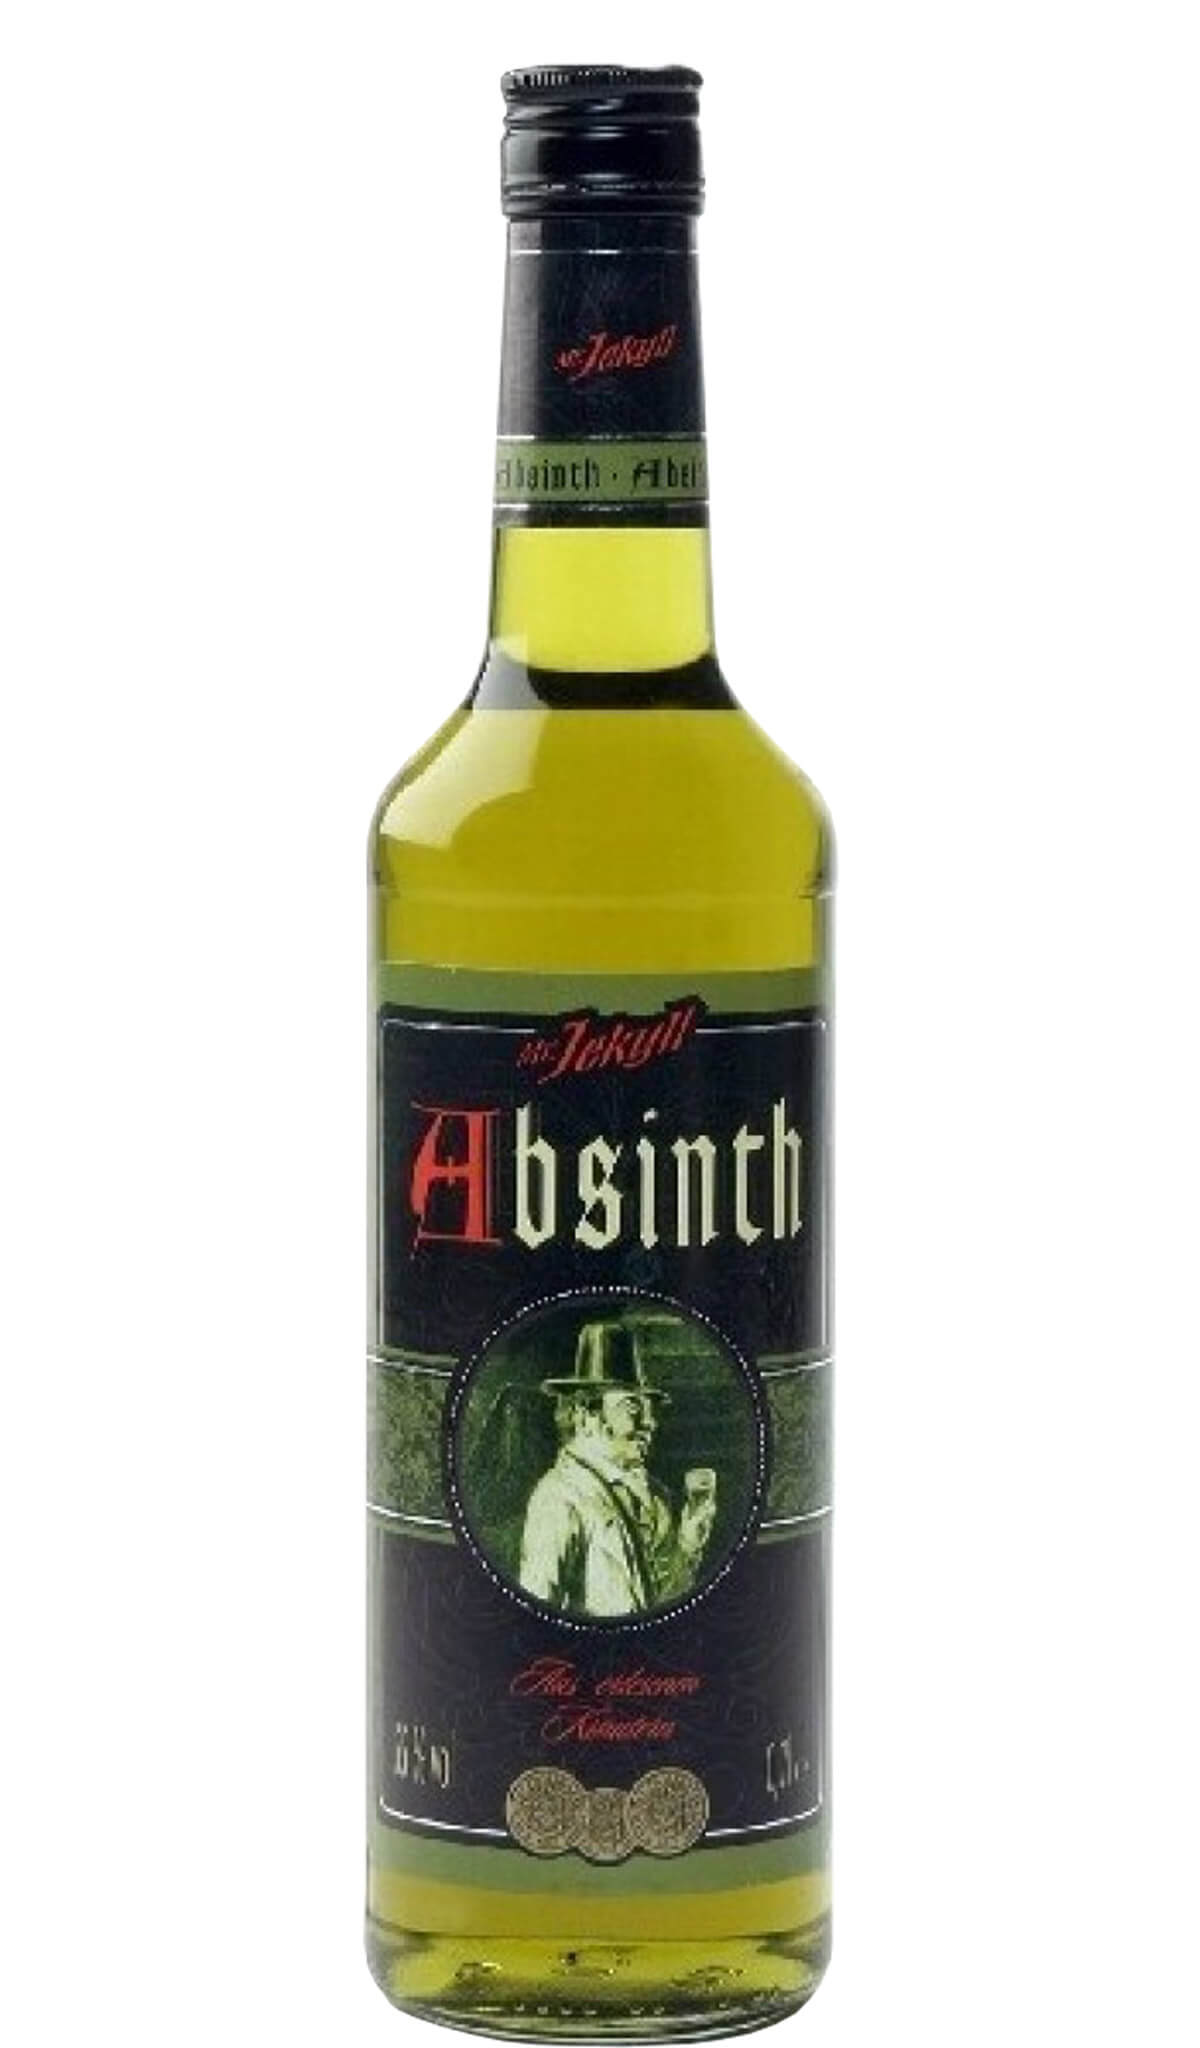 Find out more, explore the range and buy Mr Jekyll Absinth 700ml (Germany) available online at Wine Sellers Direct - Australia's independent liquor specialists.